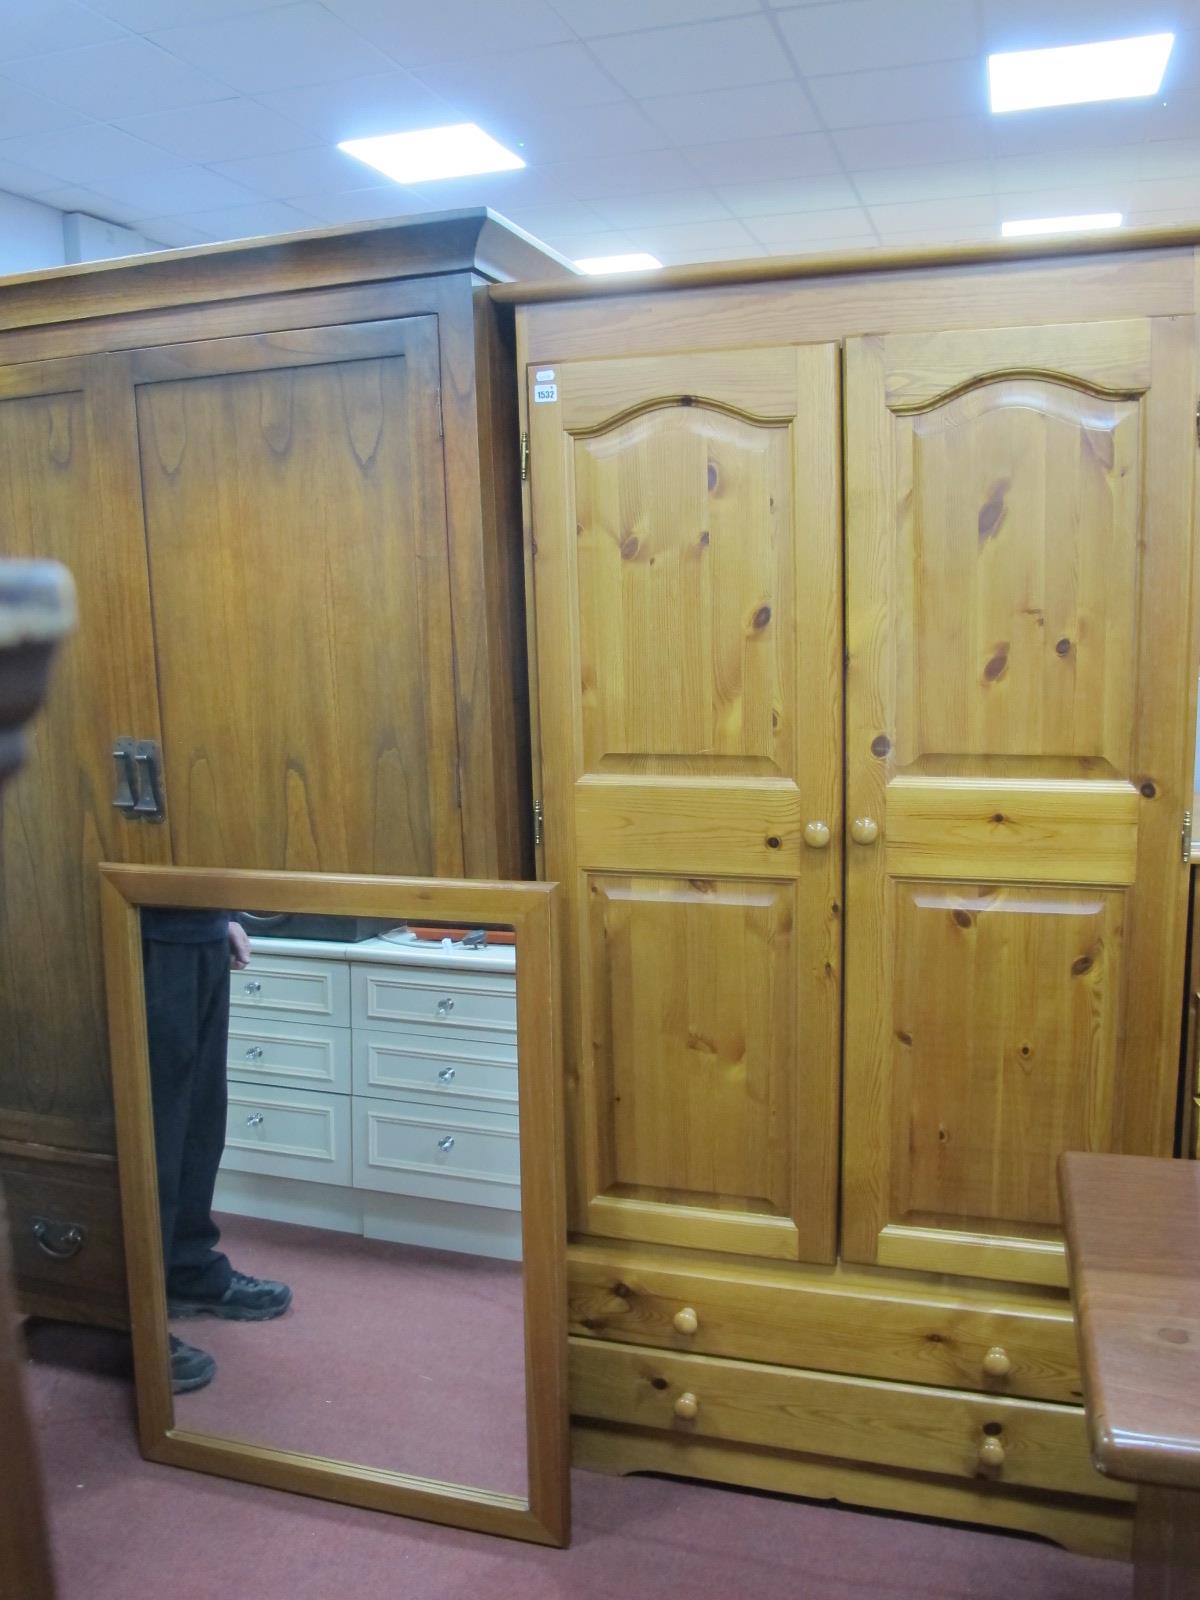 A Pine Wardrobe with twin panelled doors over two long drawers, 94cm x 83cm high, plus a wall